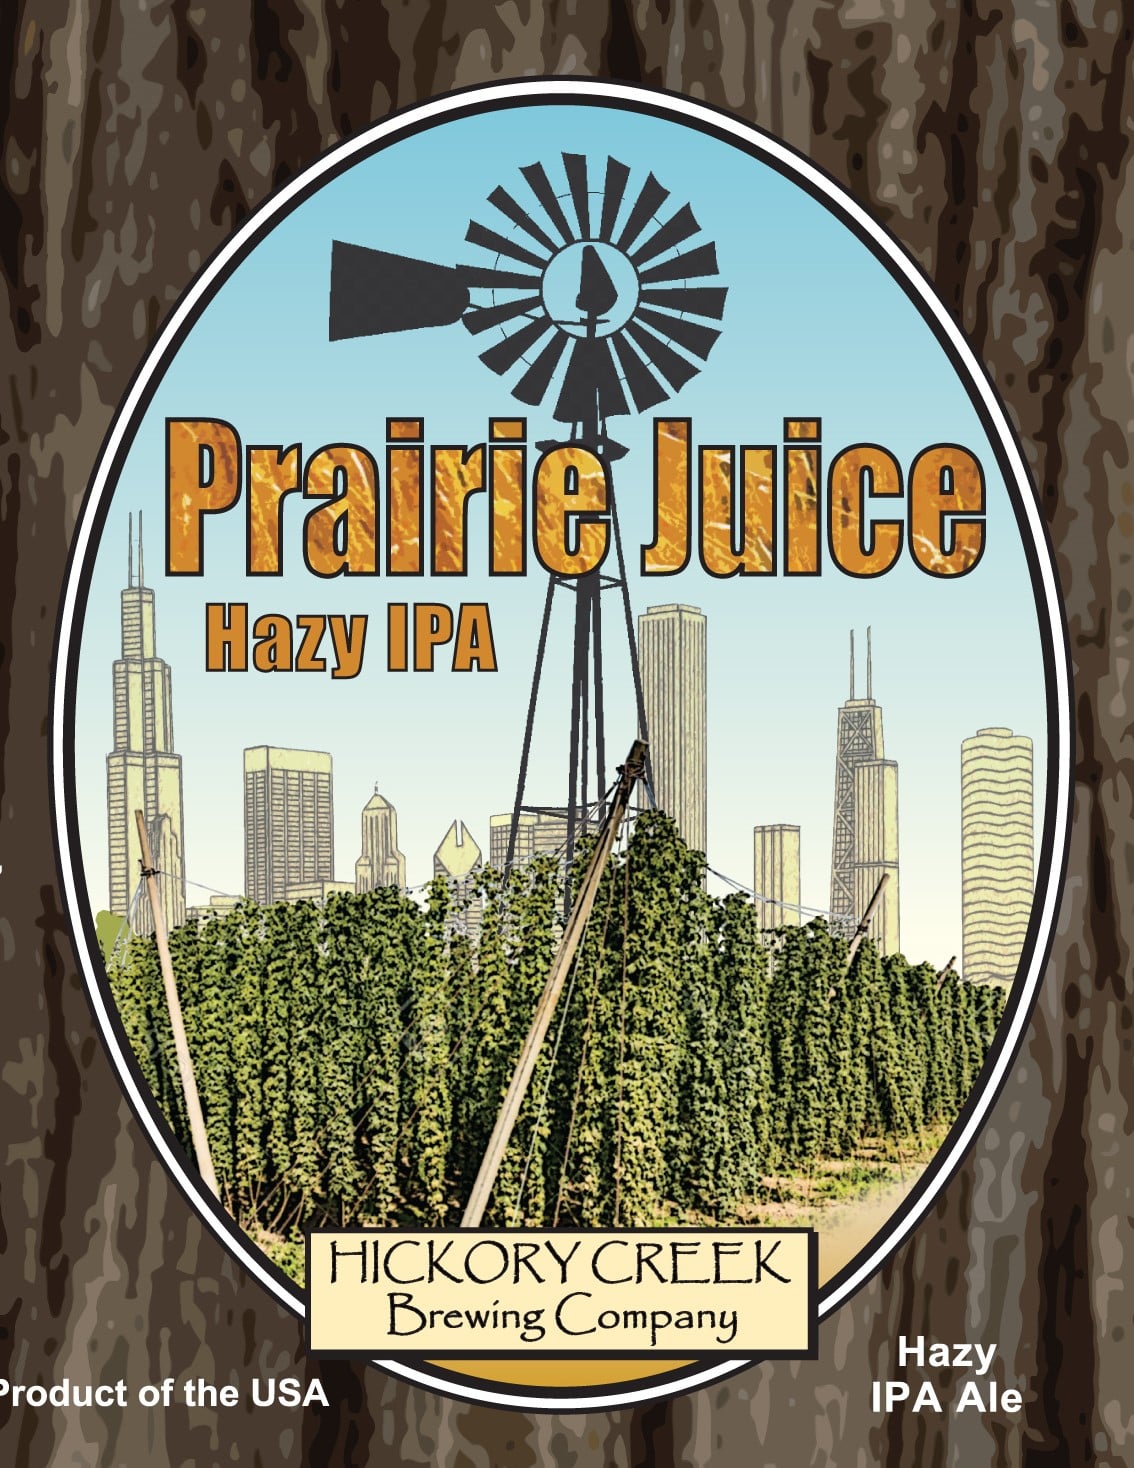 Label from Hickory Creek Brewing's Prairie Juice